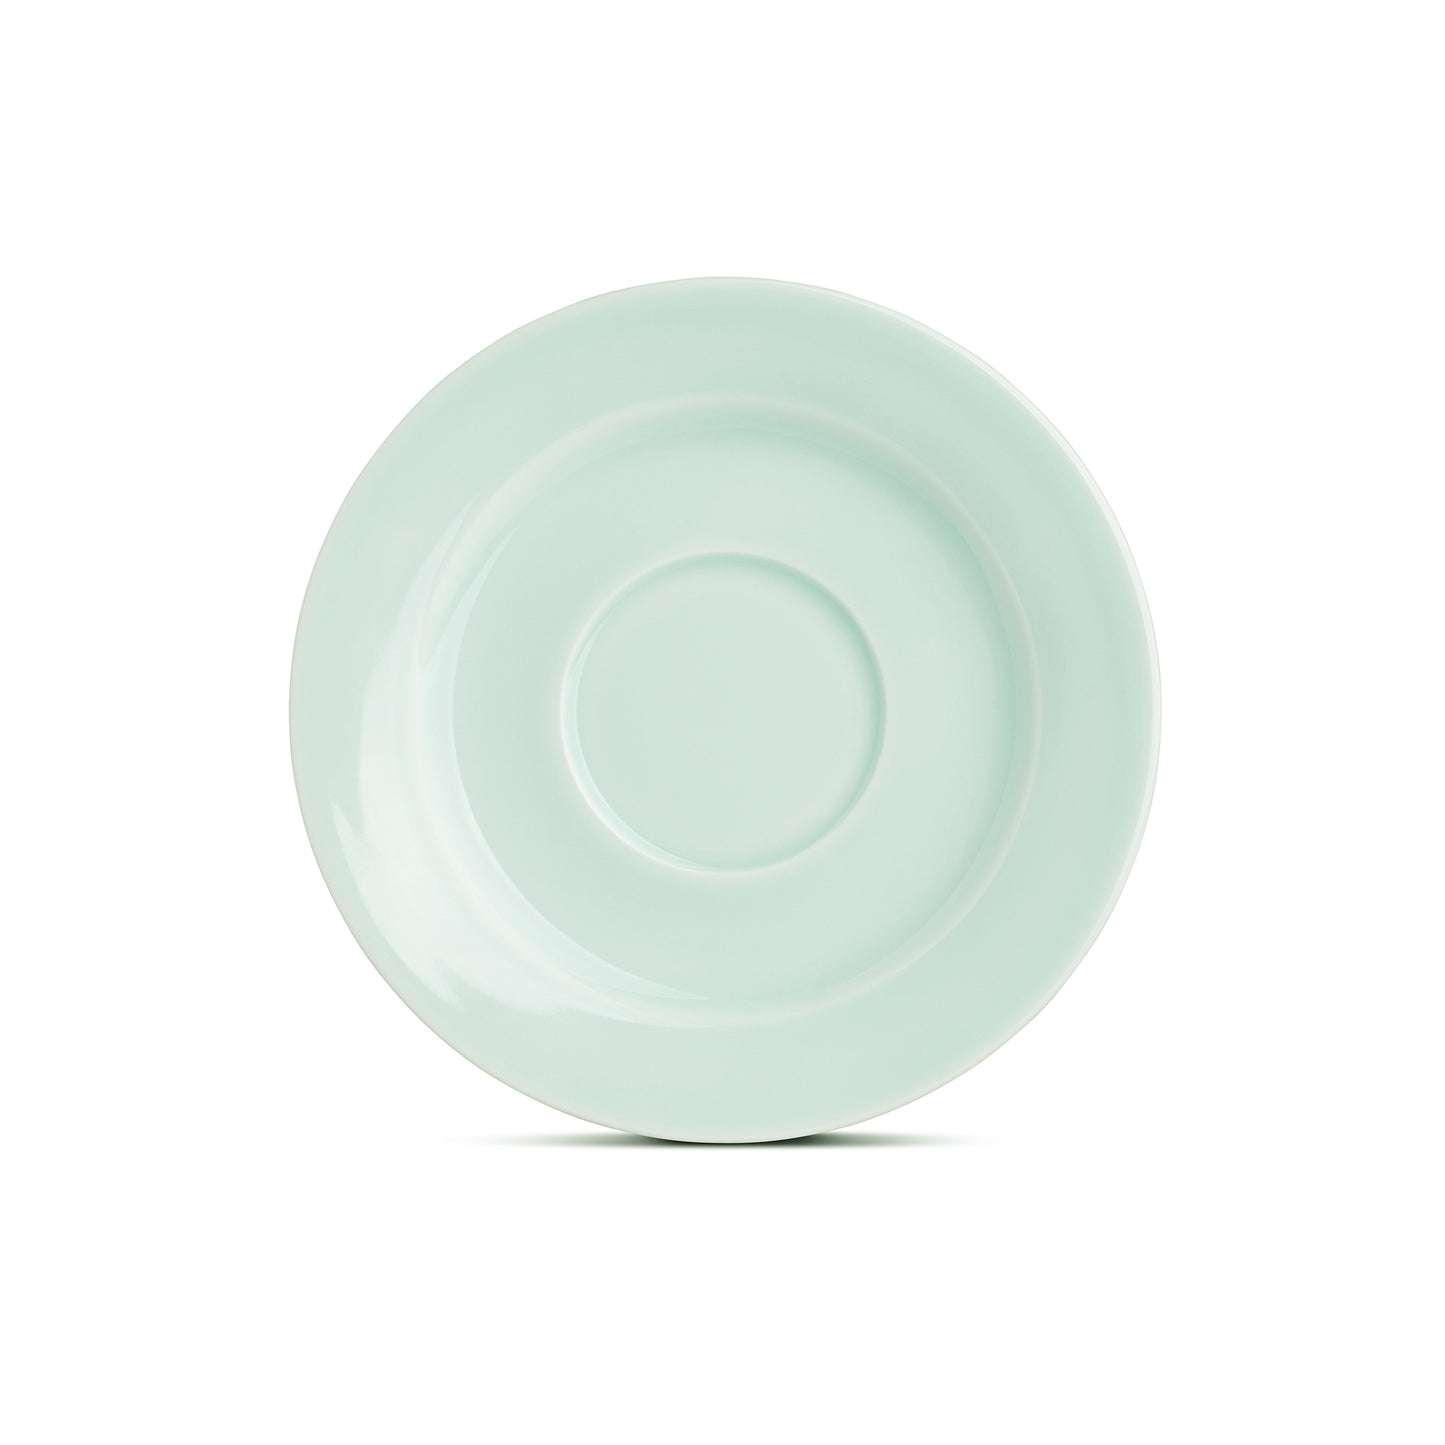 Green celadon porcelain saucer for the coffee cup sauce set, horizontal view, media 3 of 4